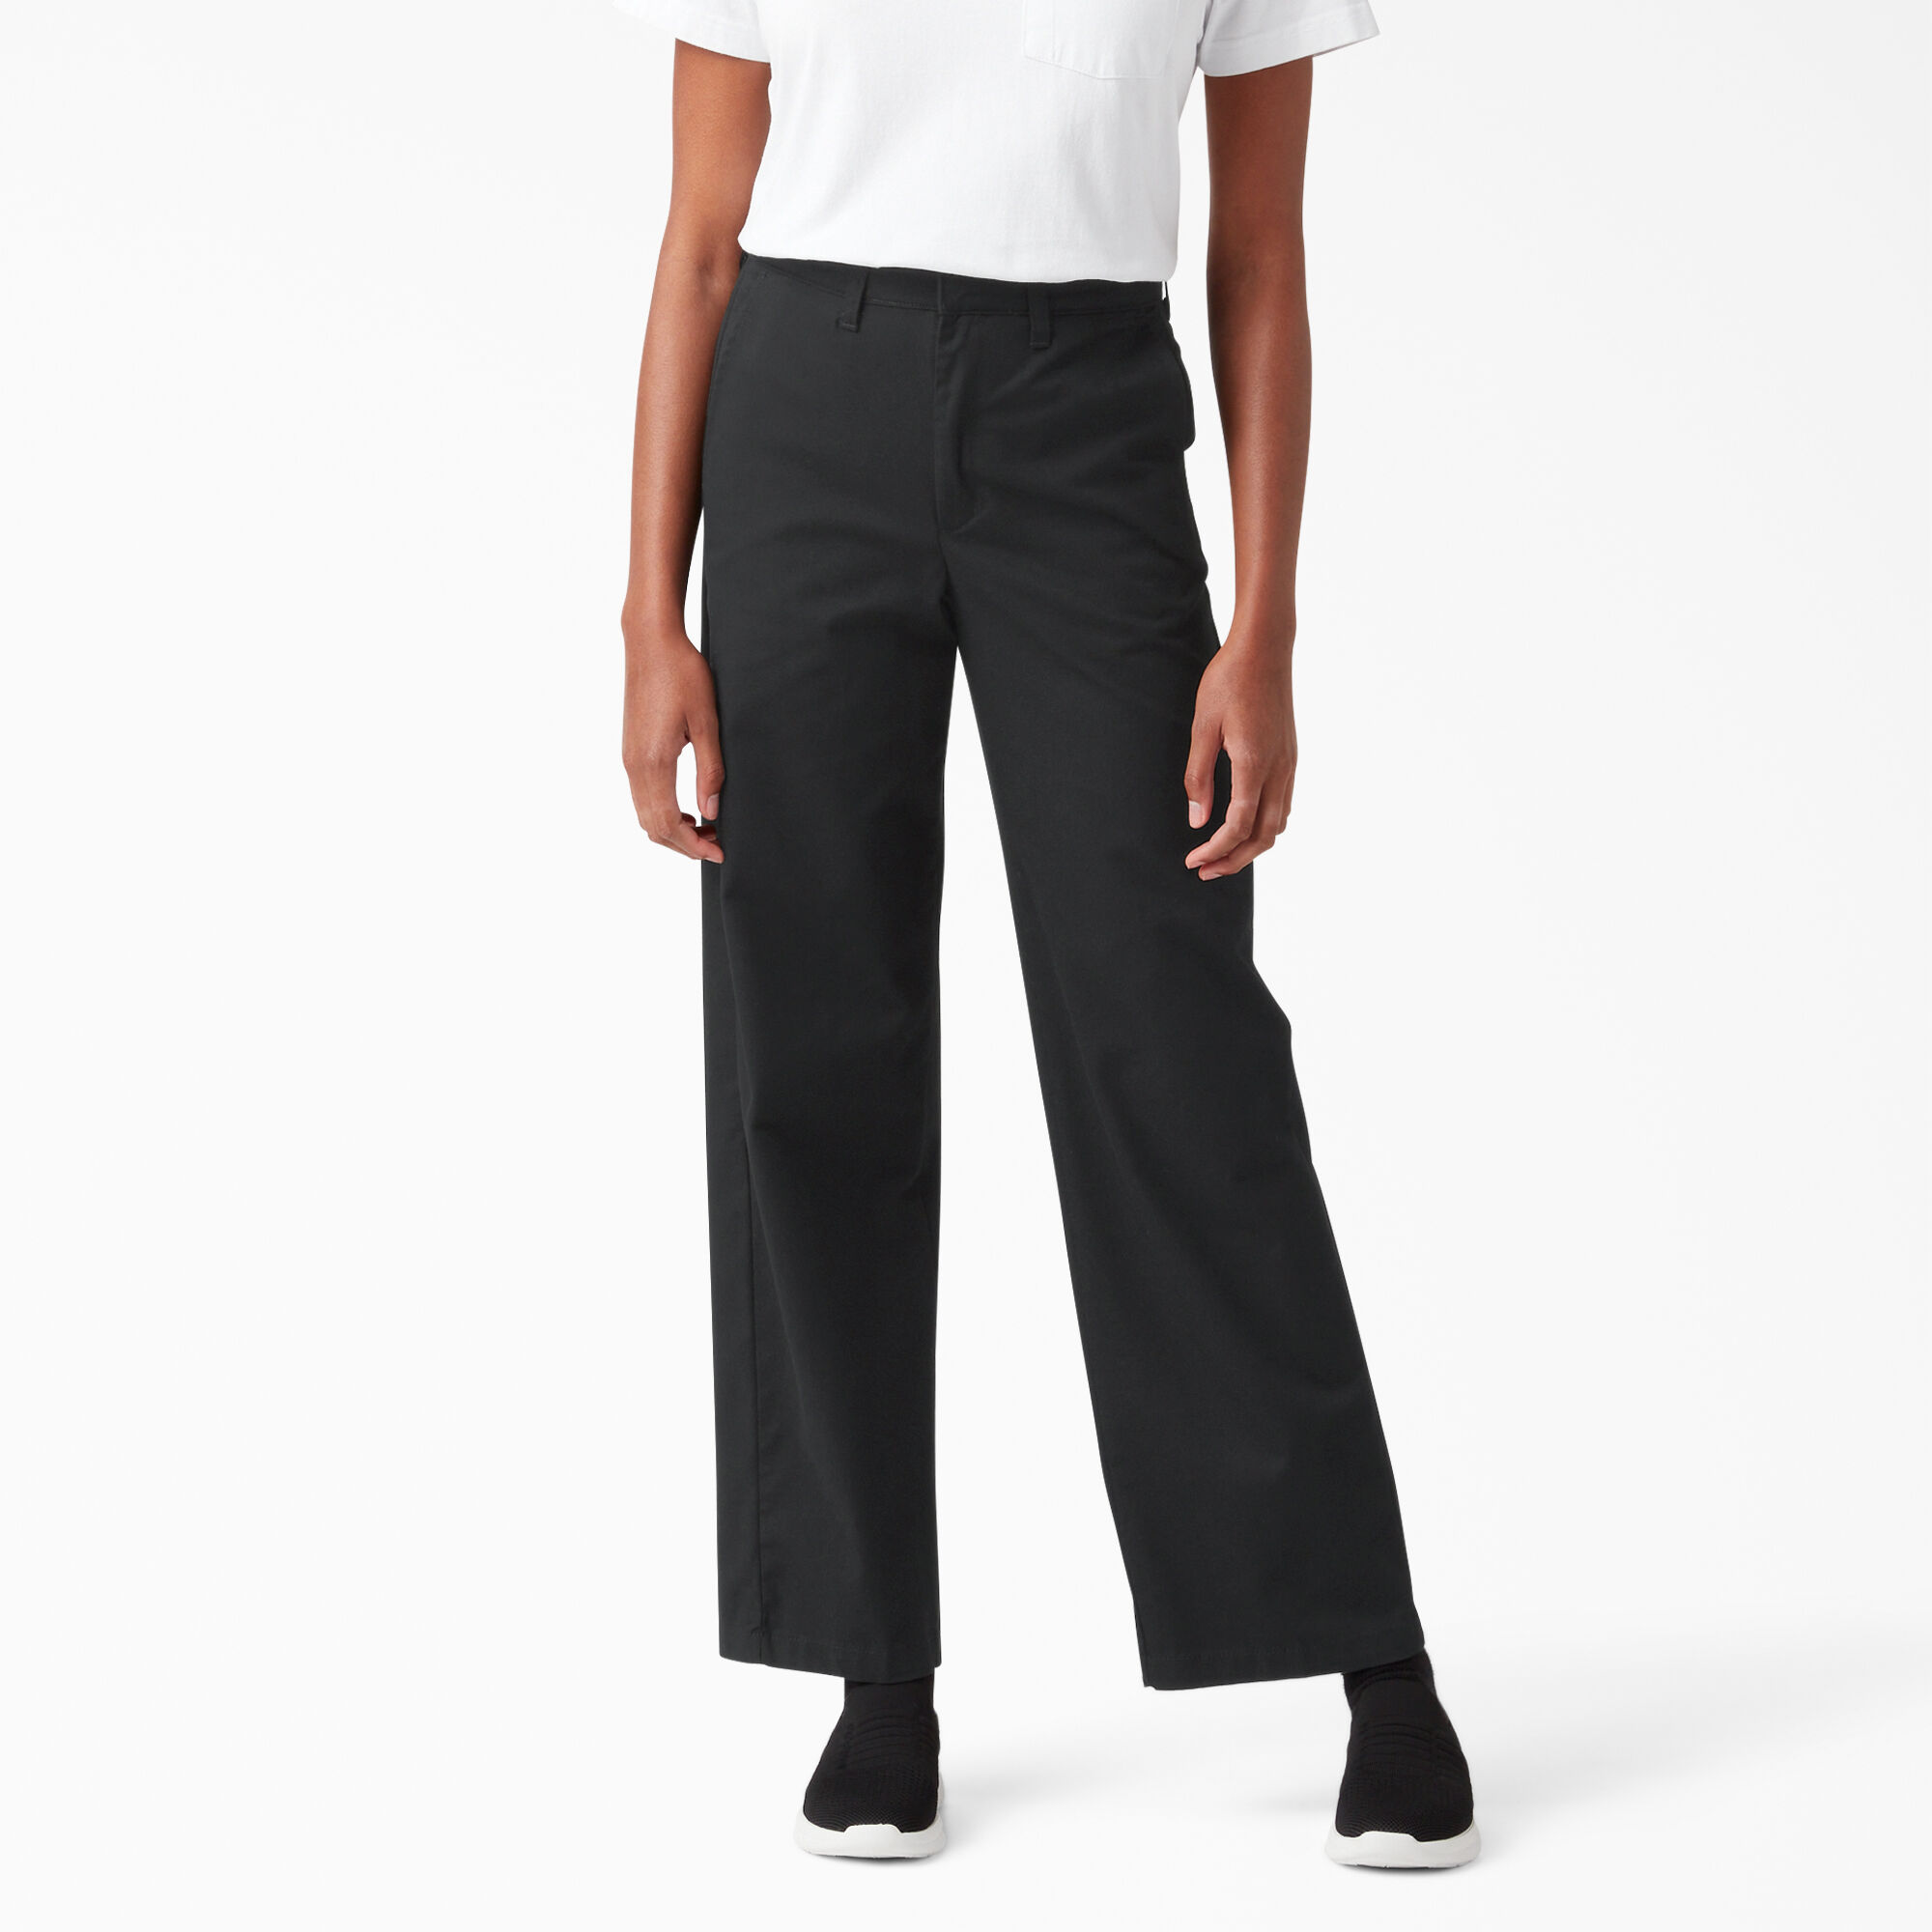 At blød vejkryds Women's Relaxed Fit Wide Leg Pants - Dickies US